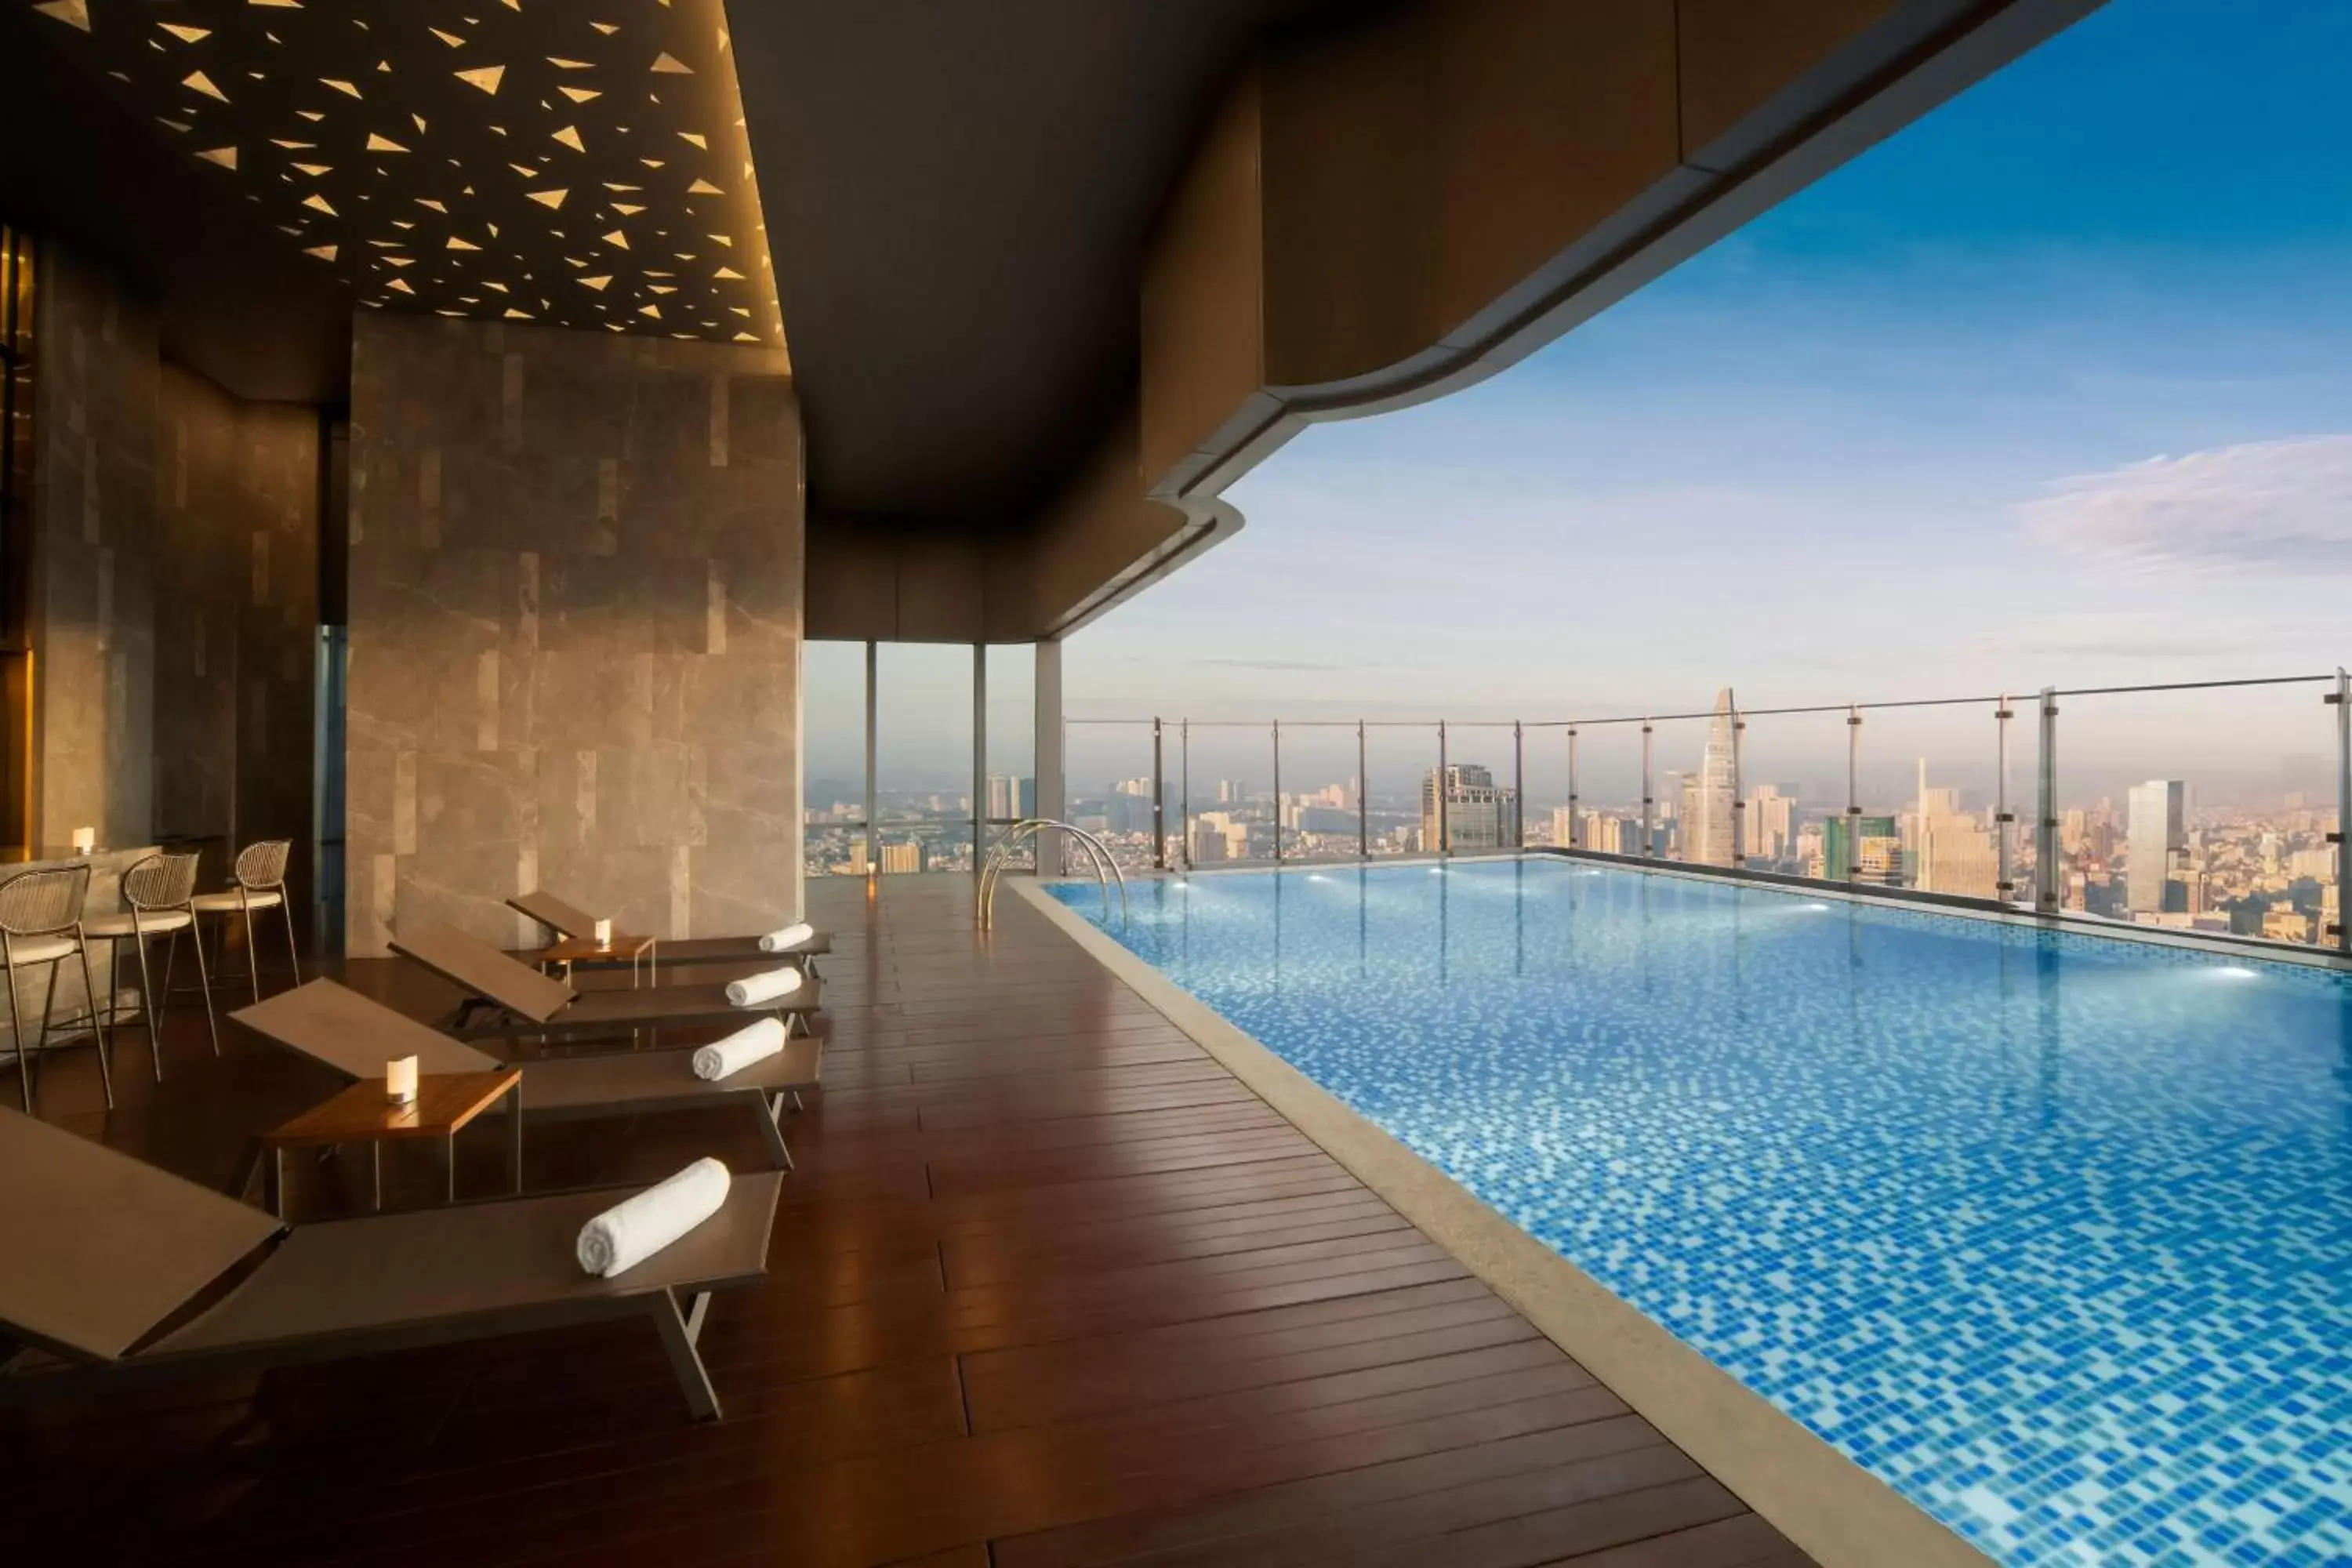 Swimming Pool in Vinpearl Landmark 81, Autograph Collection